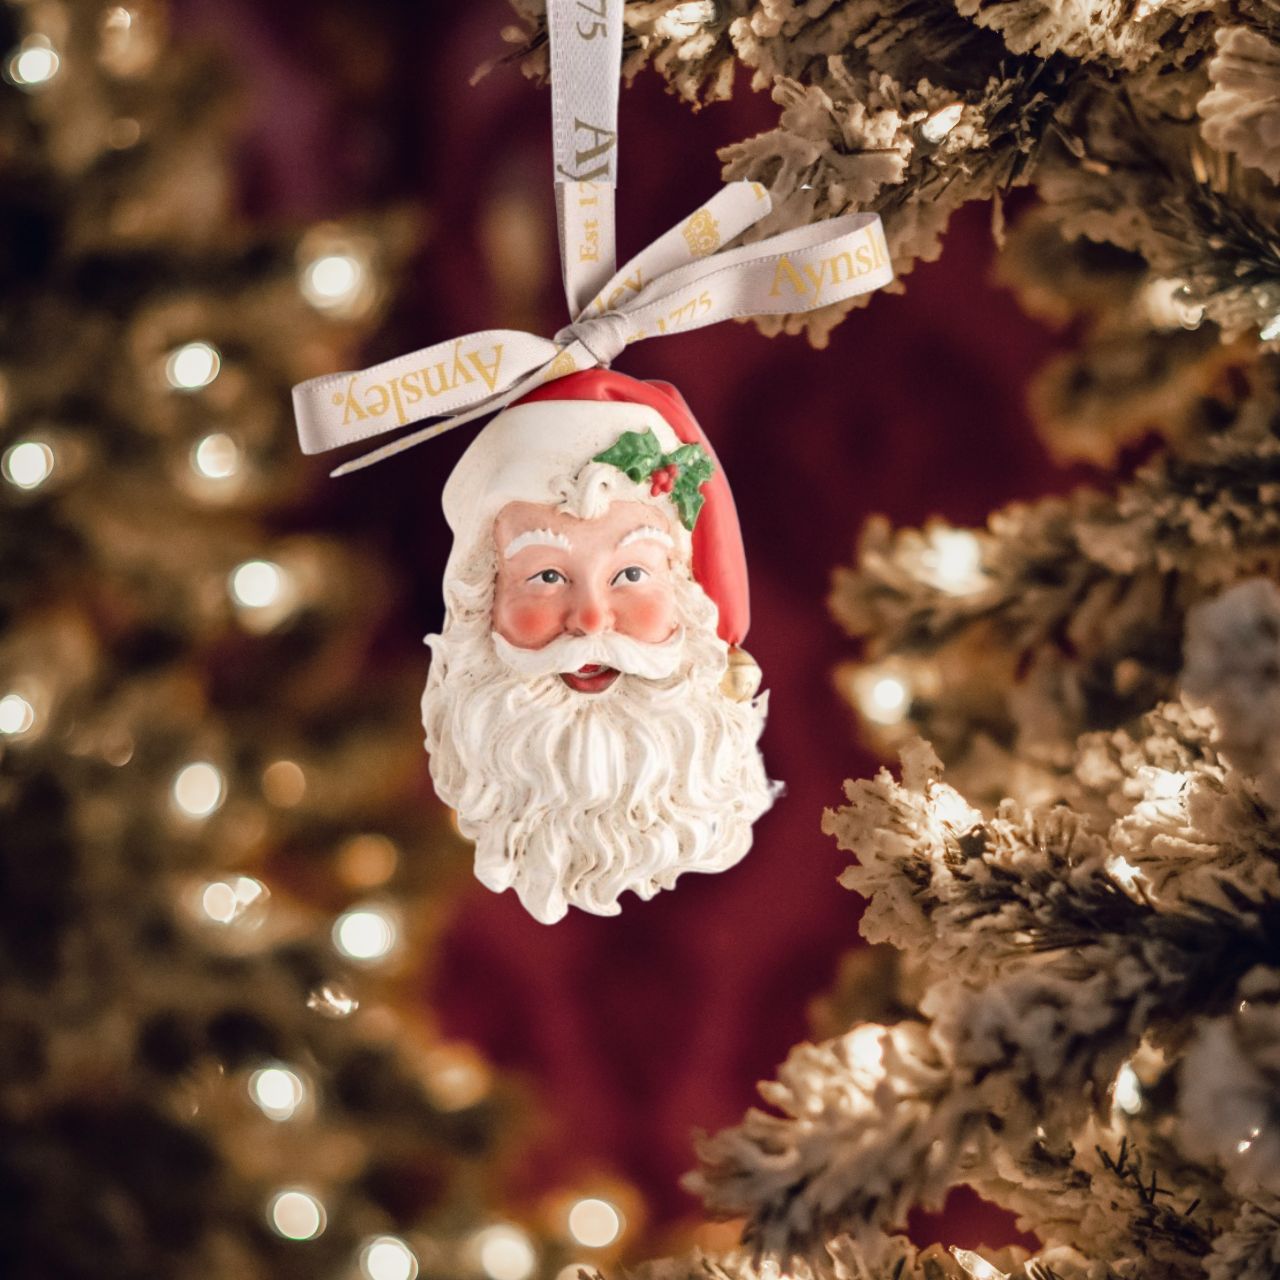 Vintage Santa Christmas Hanging Ornament  Reminiscent of bygone Christmases this Santa ornament is beautifully modelled and detailed, packed with vintage Christmas charm.